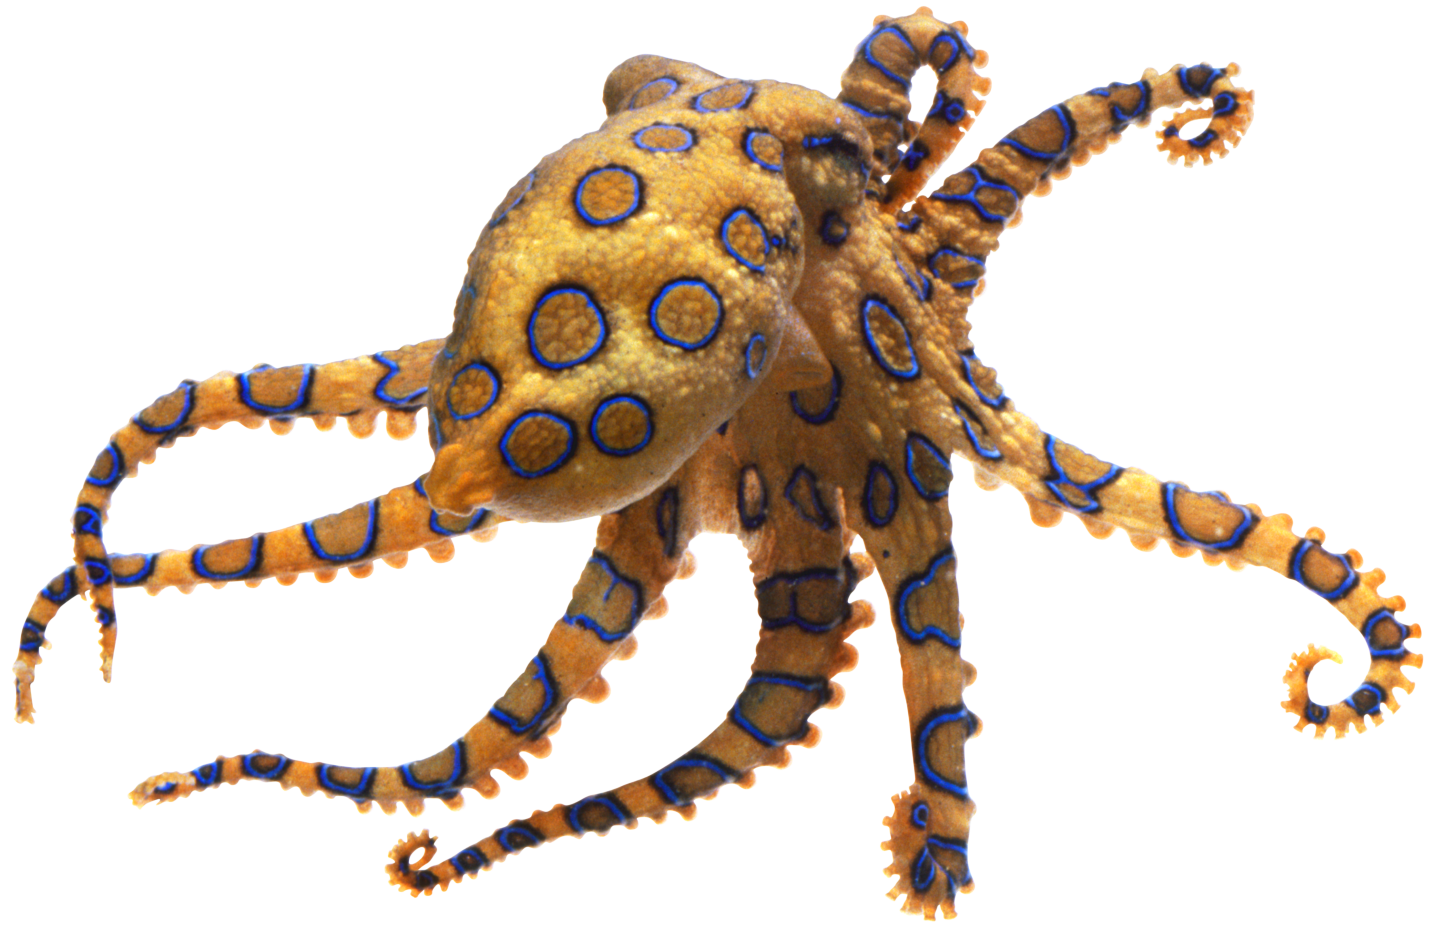 octopus clipart swimming